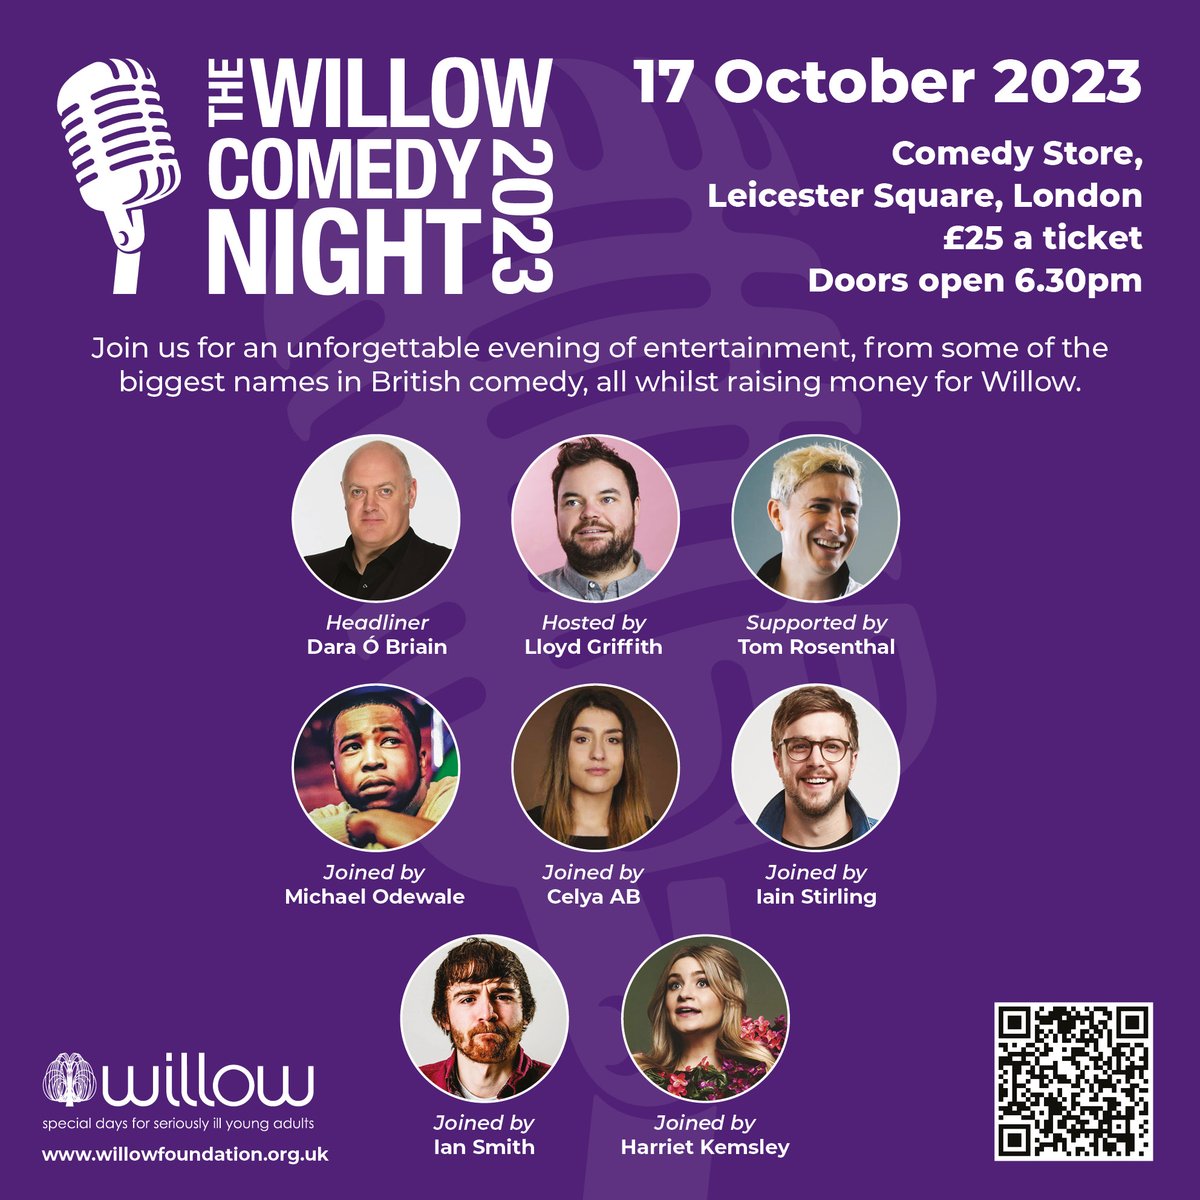 .@daraobriain, @IainDoesJokes, @rosentweets, @harrietkemsley and more perform in the #WillowComedyNight, in aid of @Willow_Fdn, at the @comedystoreuk #London tonight